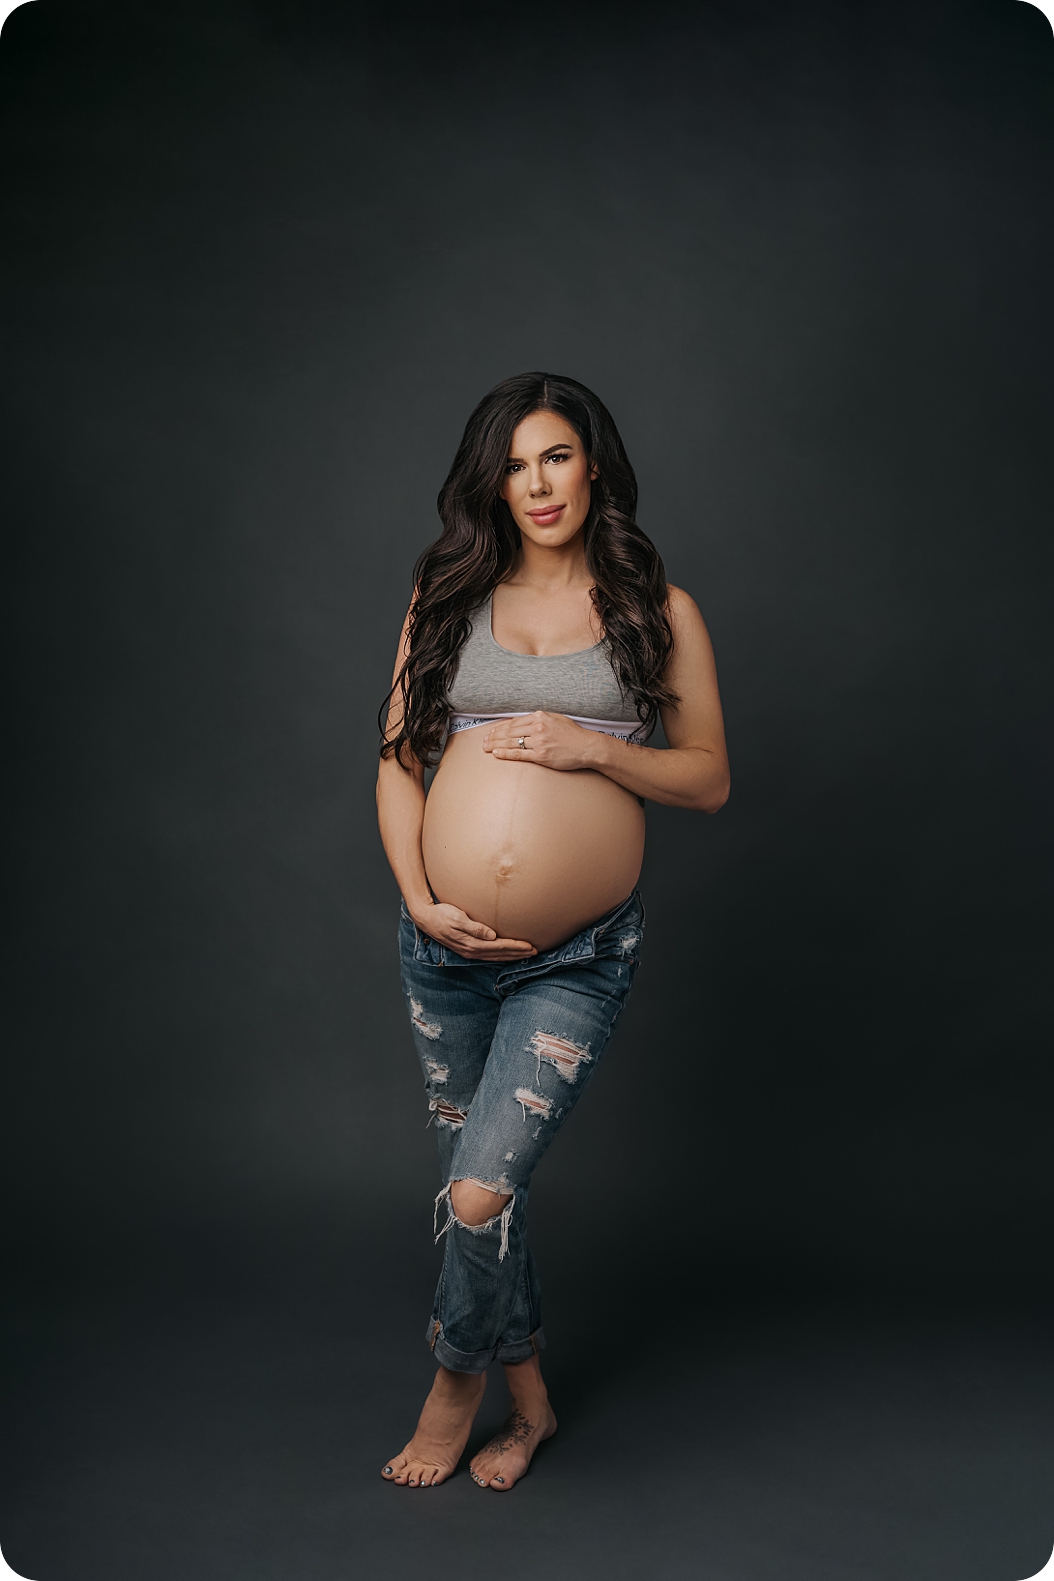 mom in Calvin Klein bra and jeans poses for Beka Price Photography during studio maternity photos in Utah